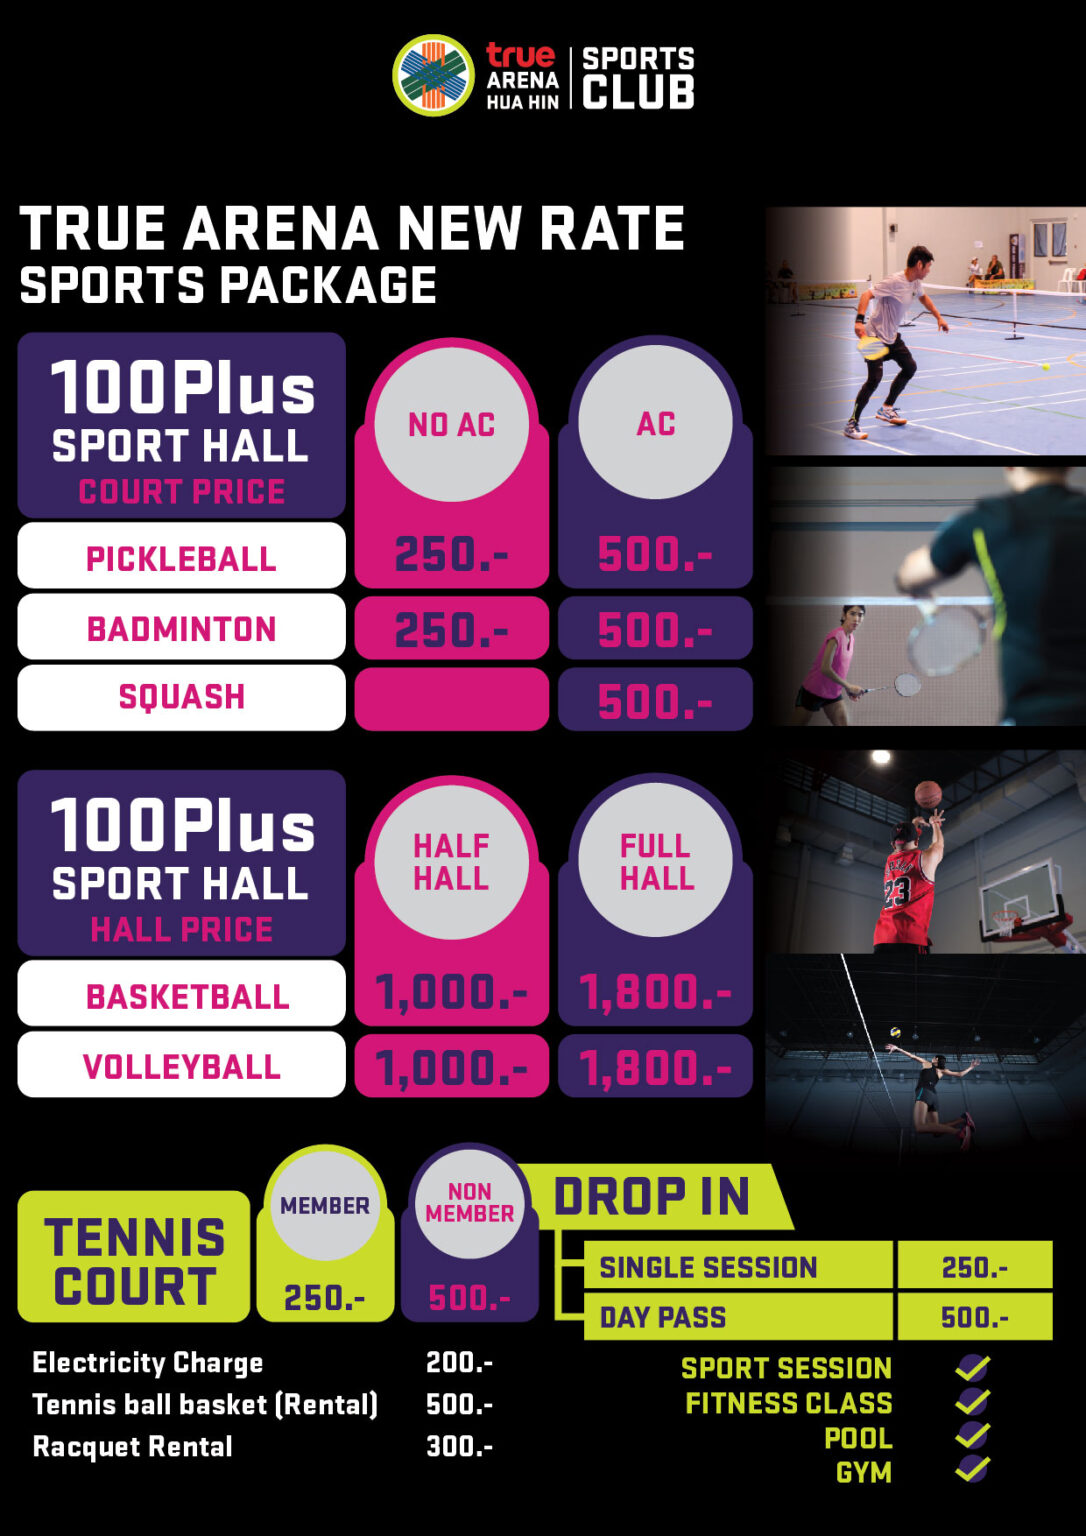 Sport Packages